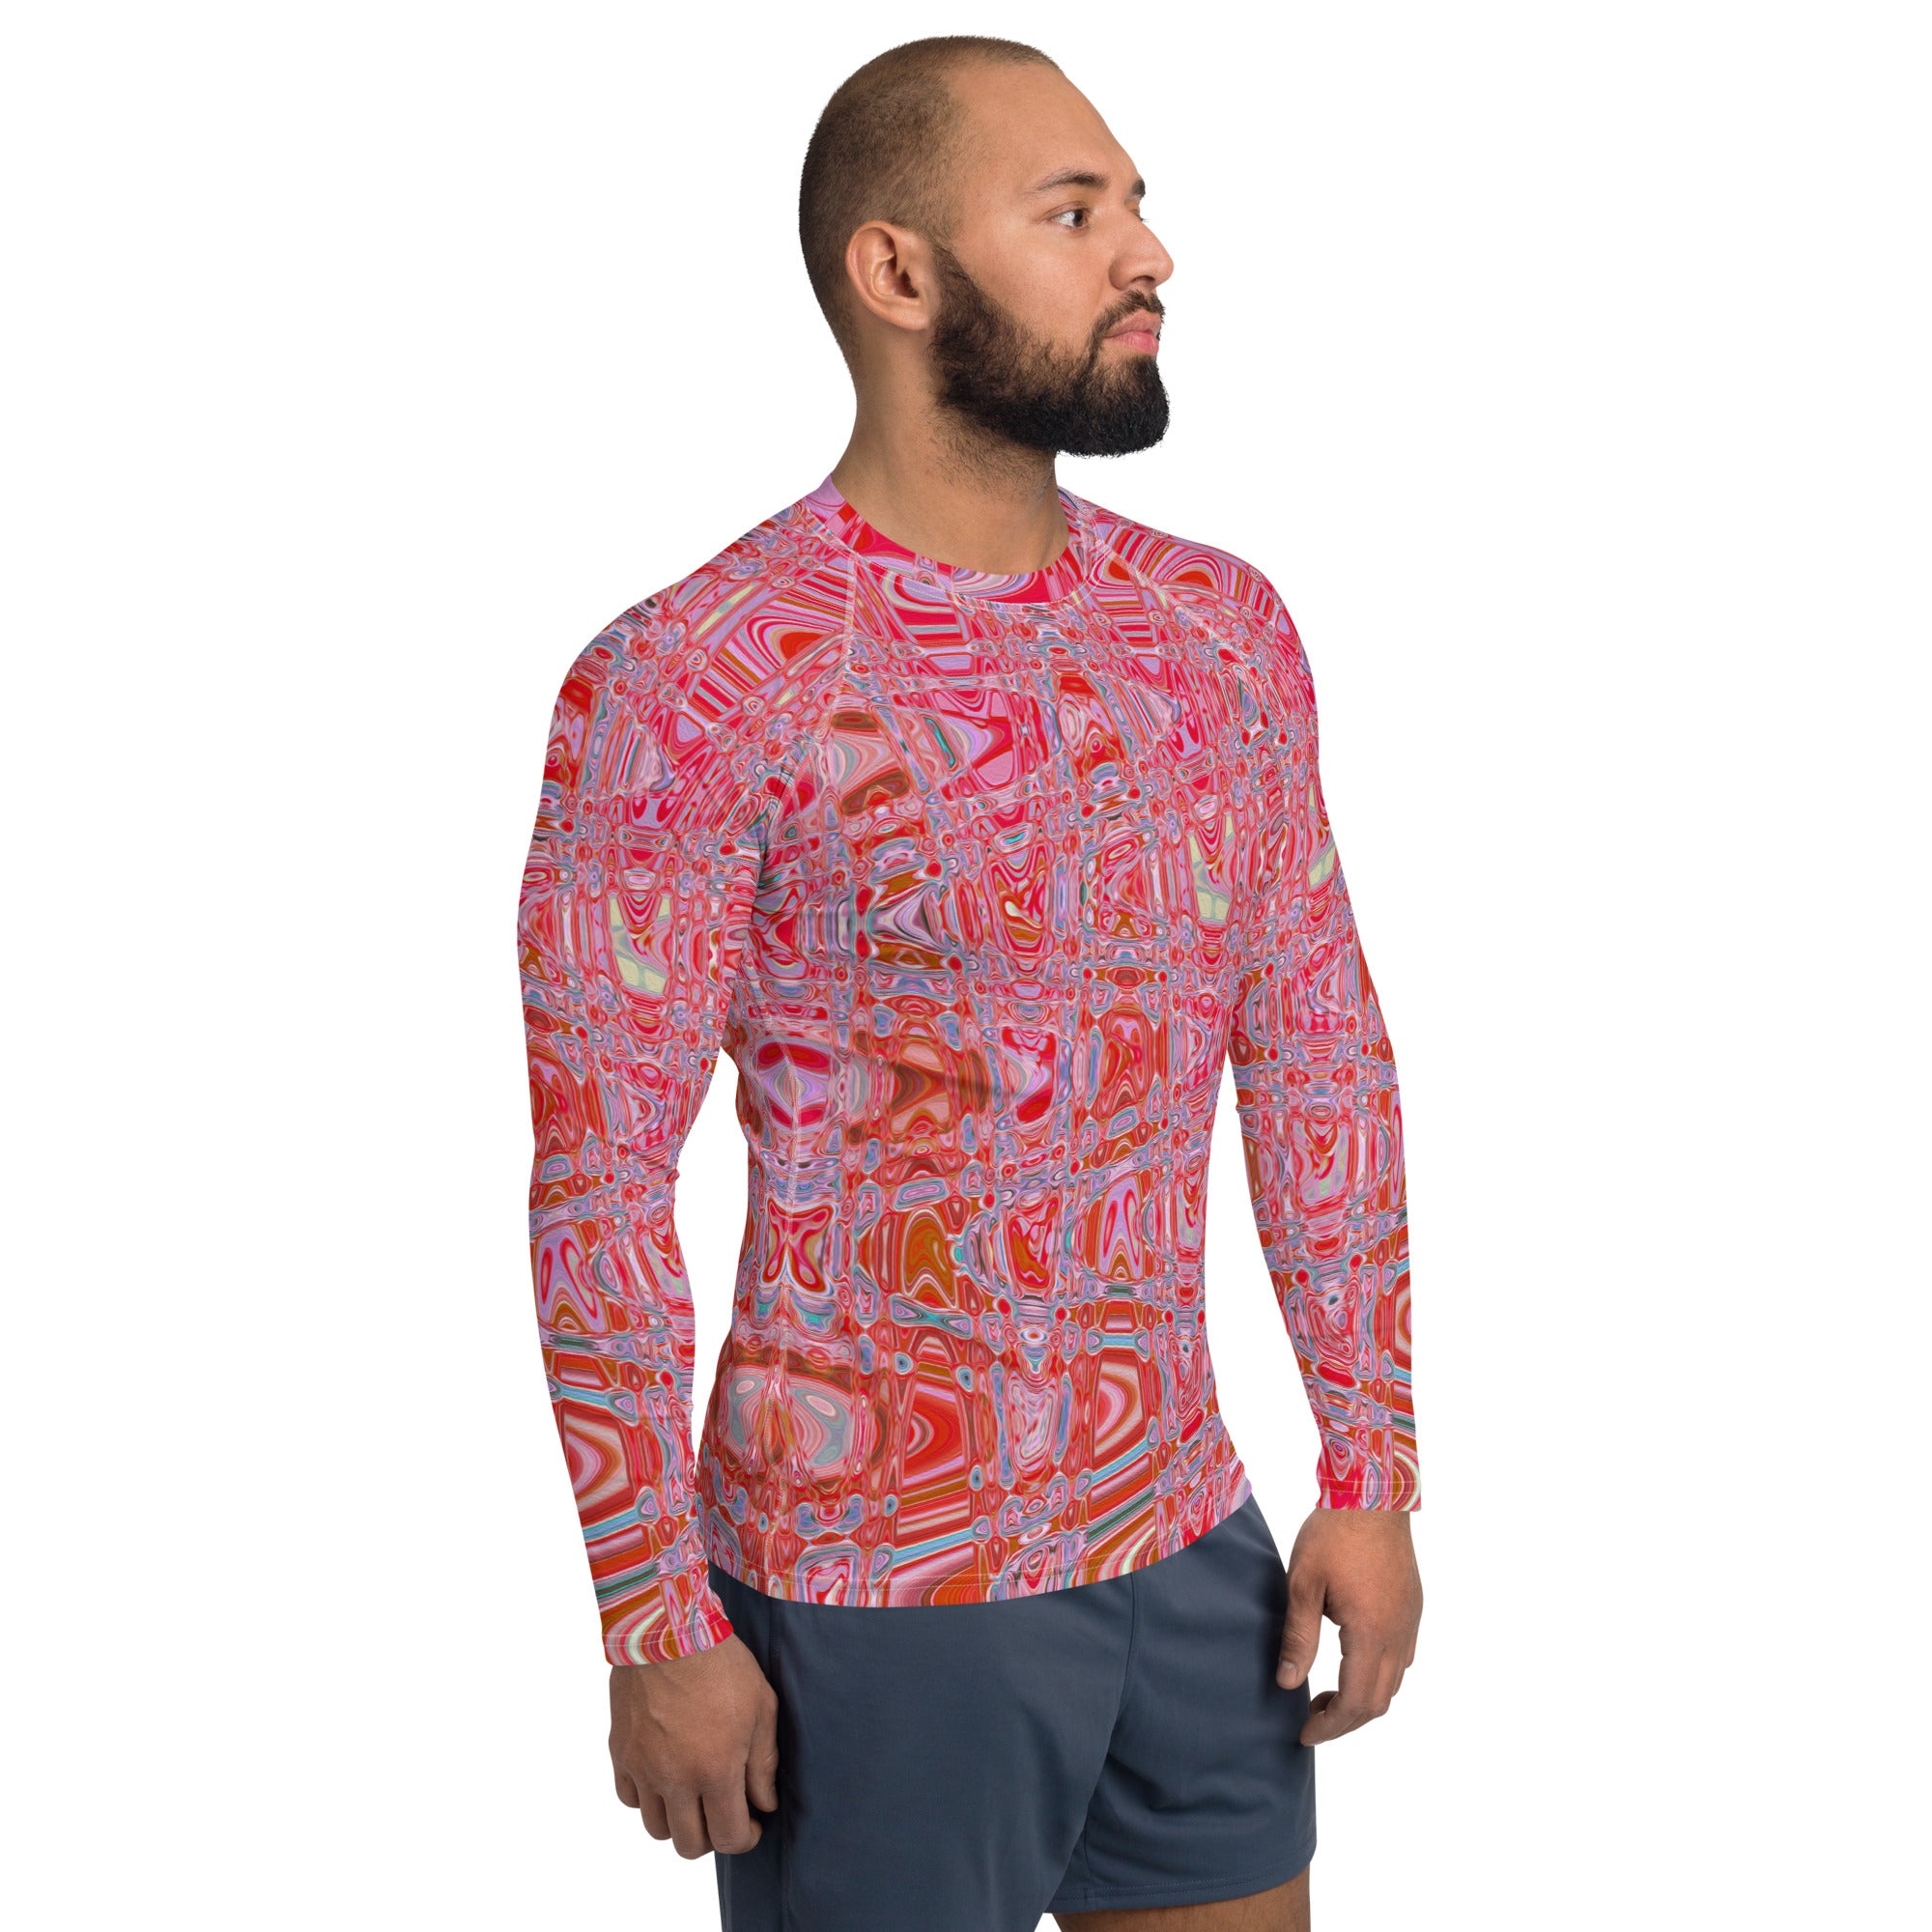 Men's Rash Guard Athletic Shirts | Cool Abstract Red and Pink Retro Zigzag Waves